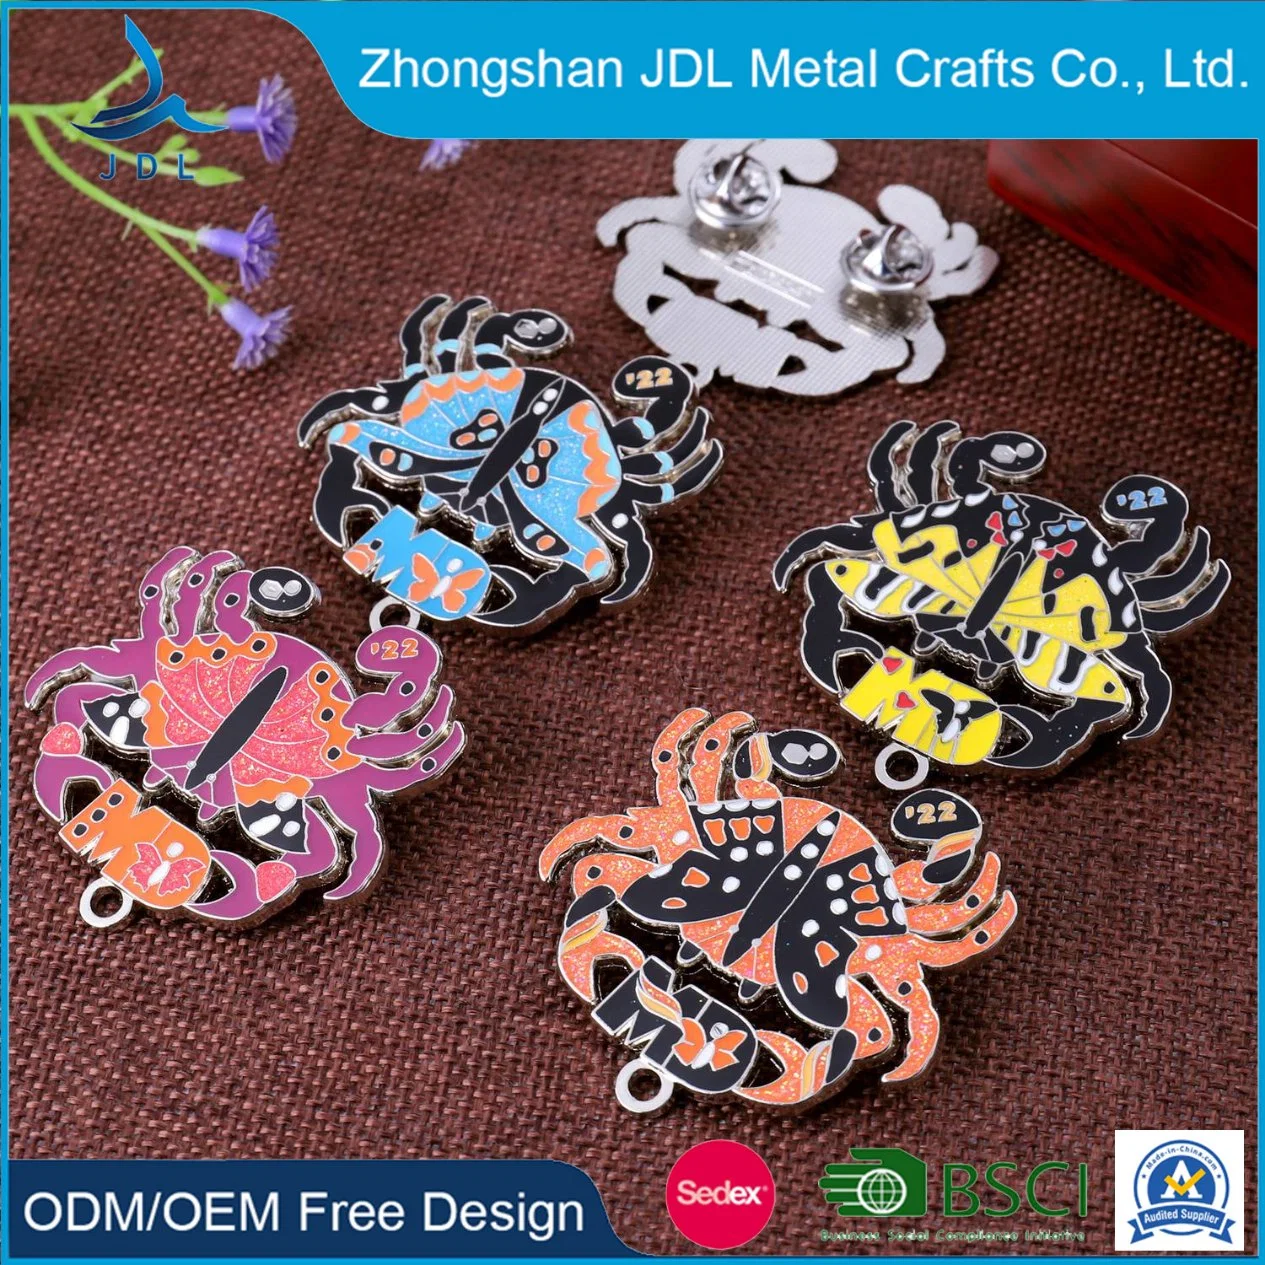 China Wholesale Free Sample Manufacture Customized Logo 3D Police Badge Gold Name Metal Crafts Hard Soft Enamel Brooch Heart Disney Lapel Pins as Promotion Gift